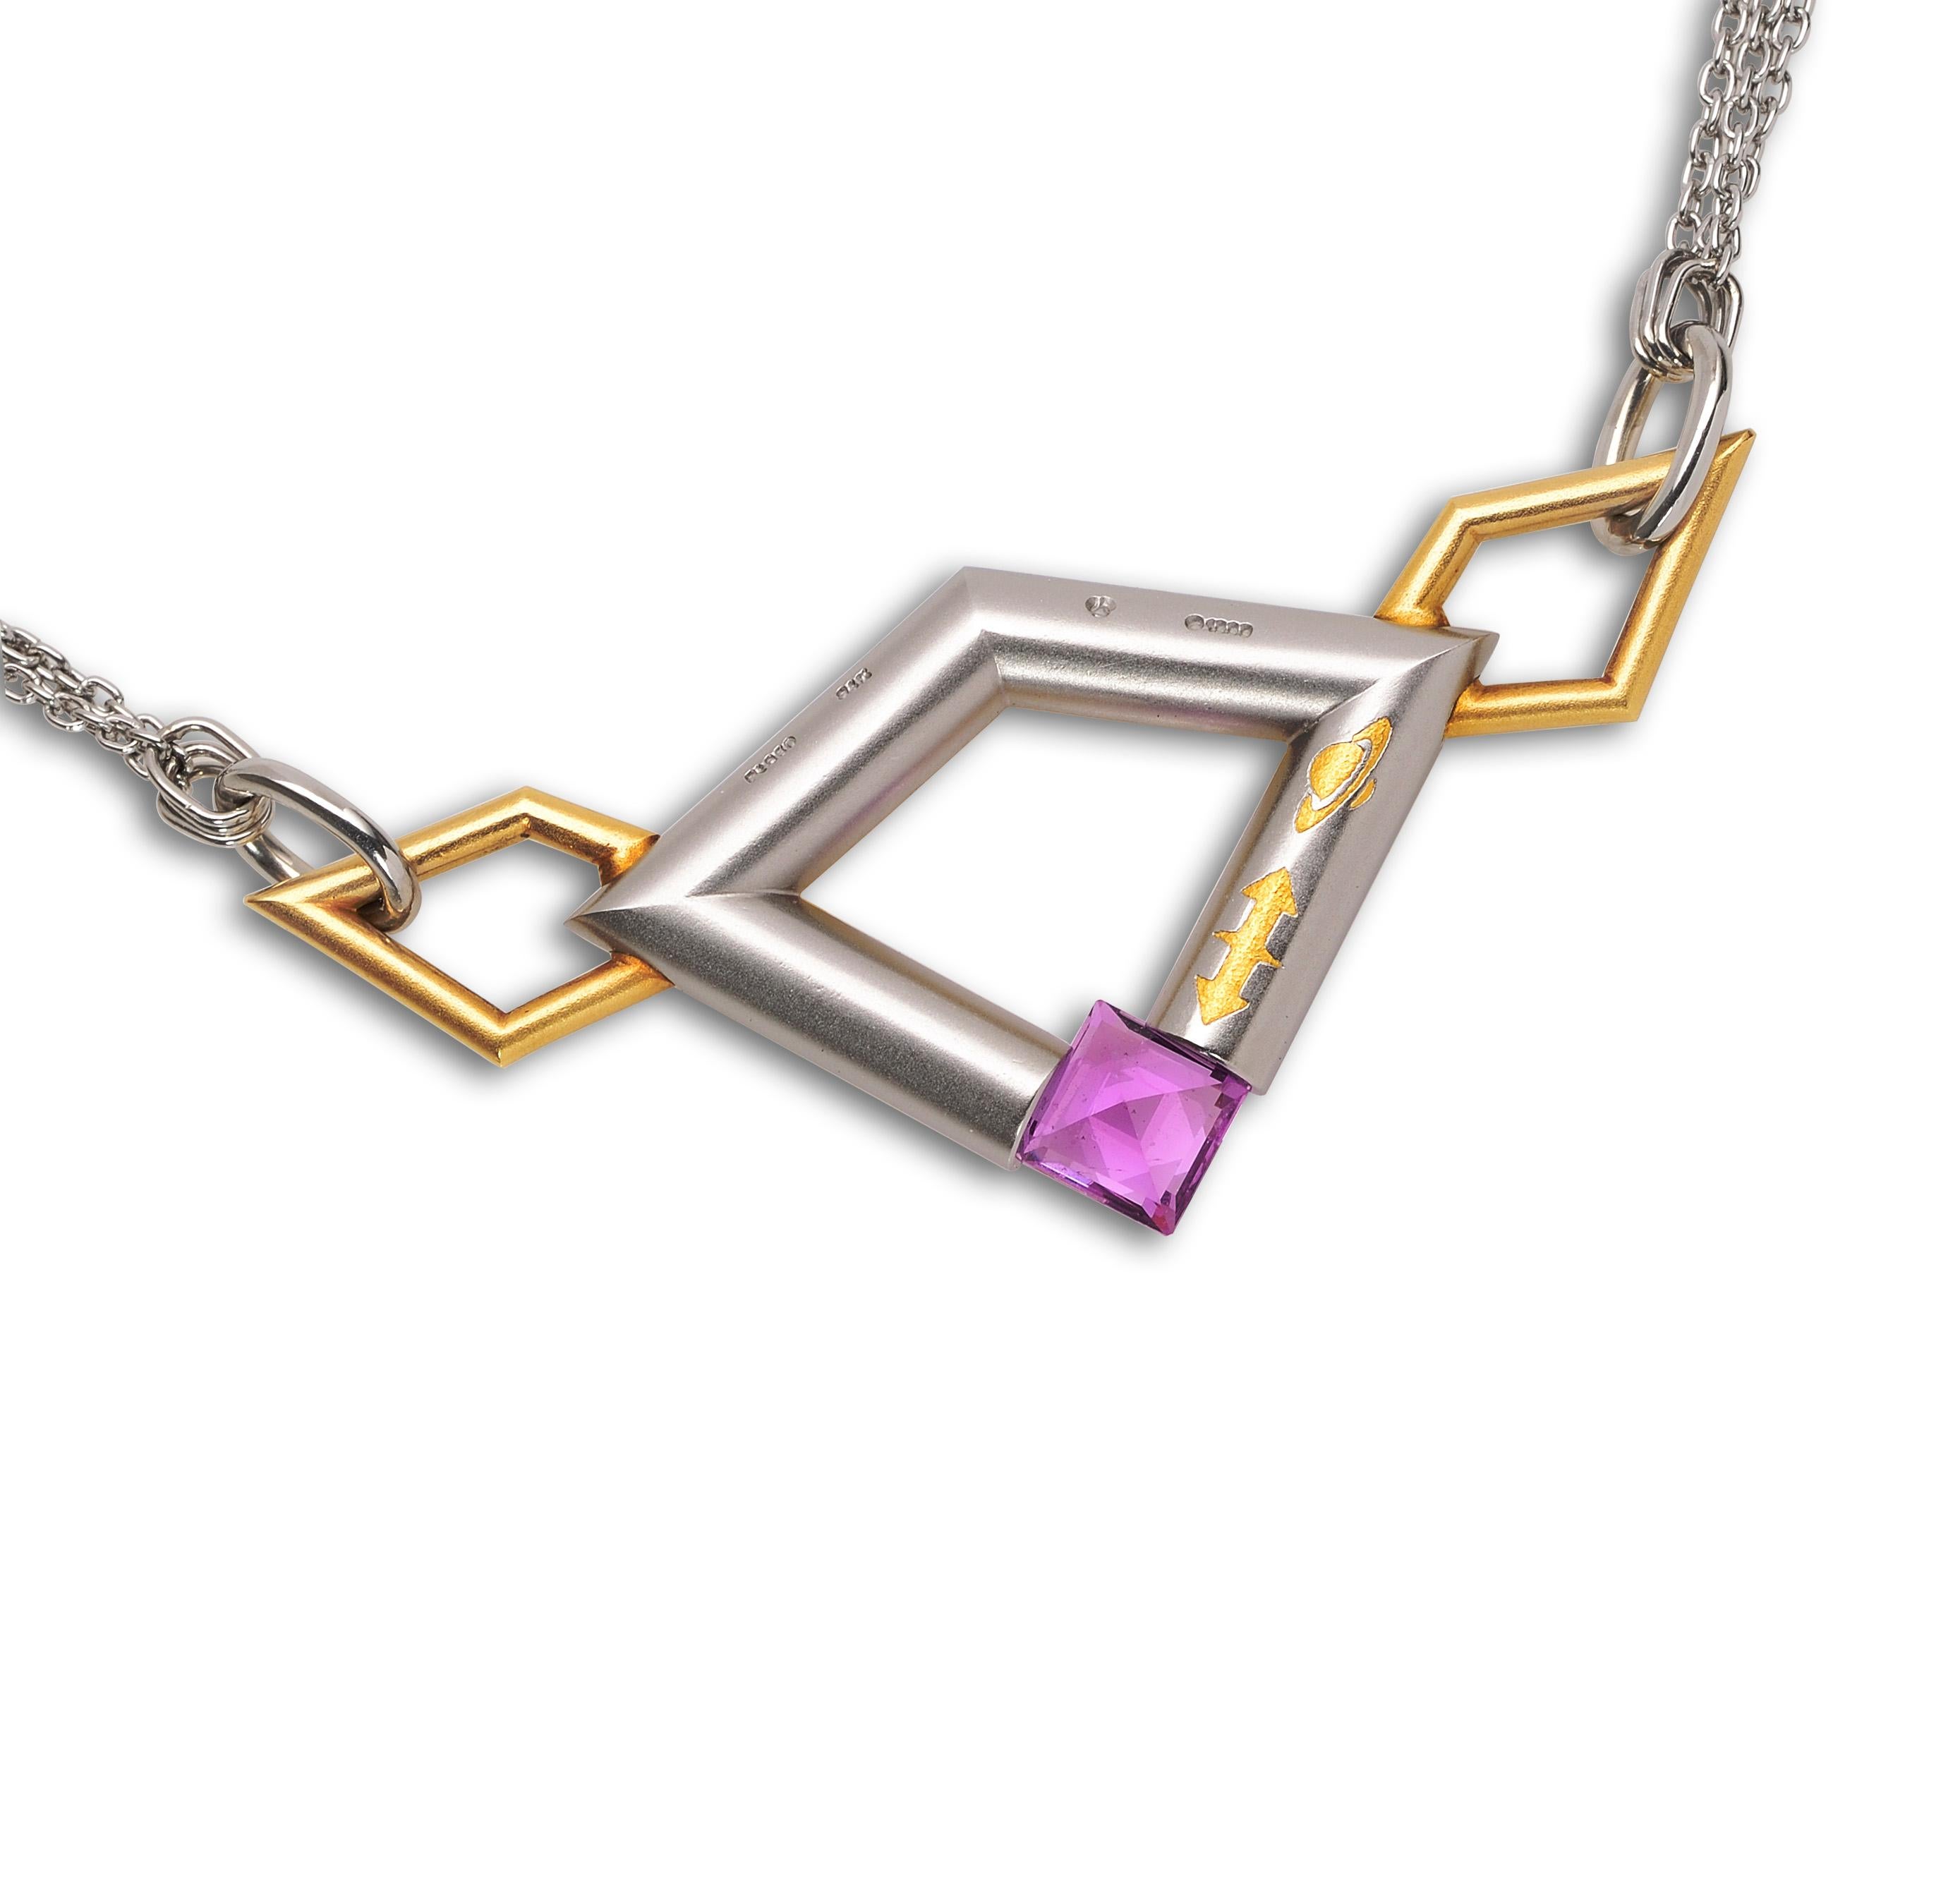 The Steven Kretchmer Astra Necklace with a tension-set pink sapphire is a vintage, never been worn piece, from the Kretchmer vault and is handcrafted in platinum with 24k crystallized yellow gold inlay. The 0.88 ct. modified square cut sapphire is